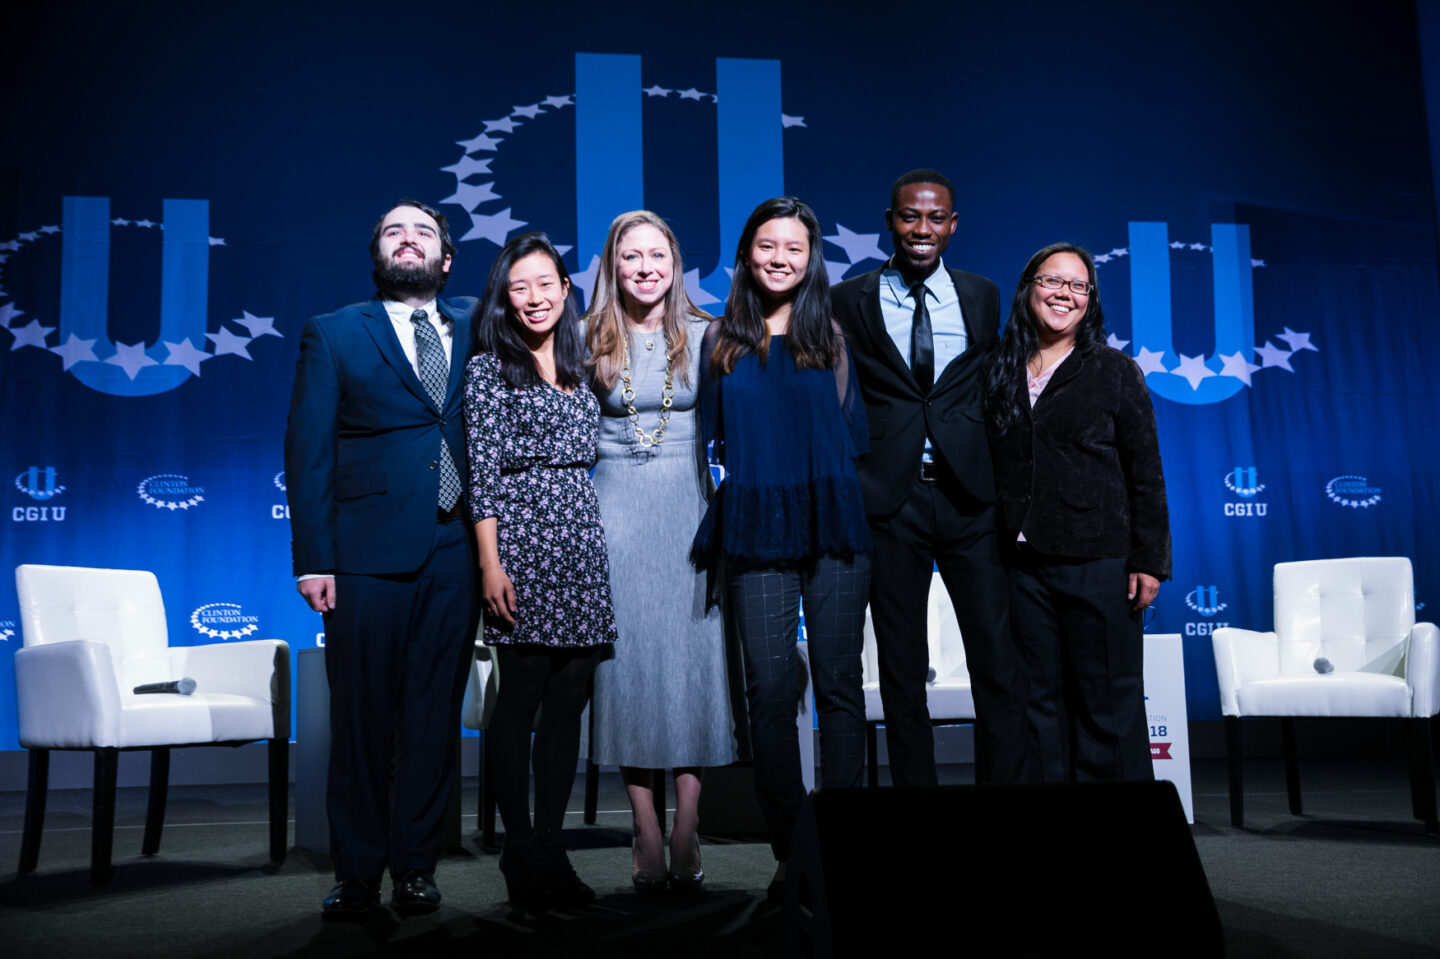 Chelsea Clinton stands onstage with group of CGI U students